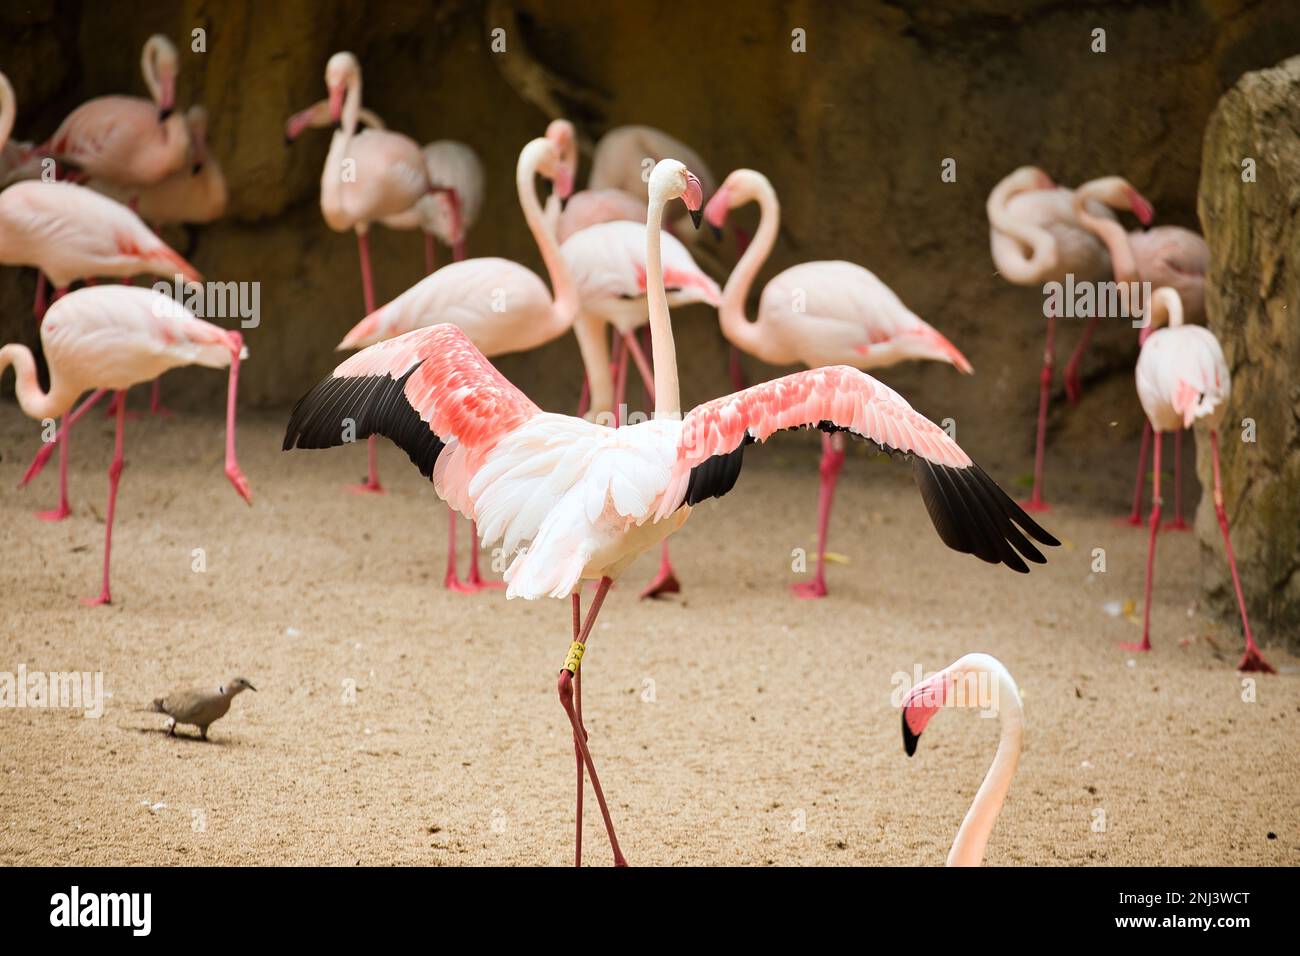 Full body shot of a pink flamingo taken from behind, with other flamingos diffused in the background. Stock Photo